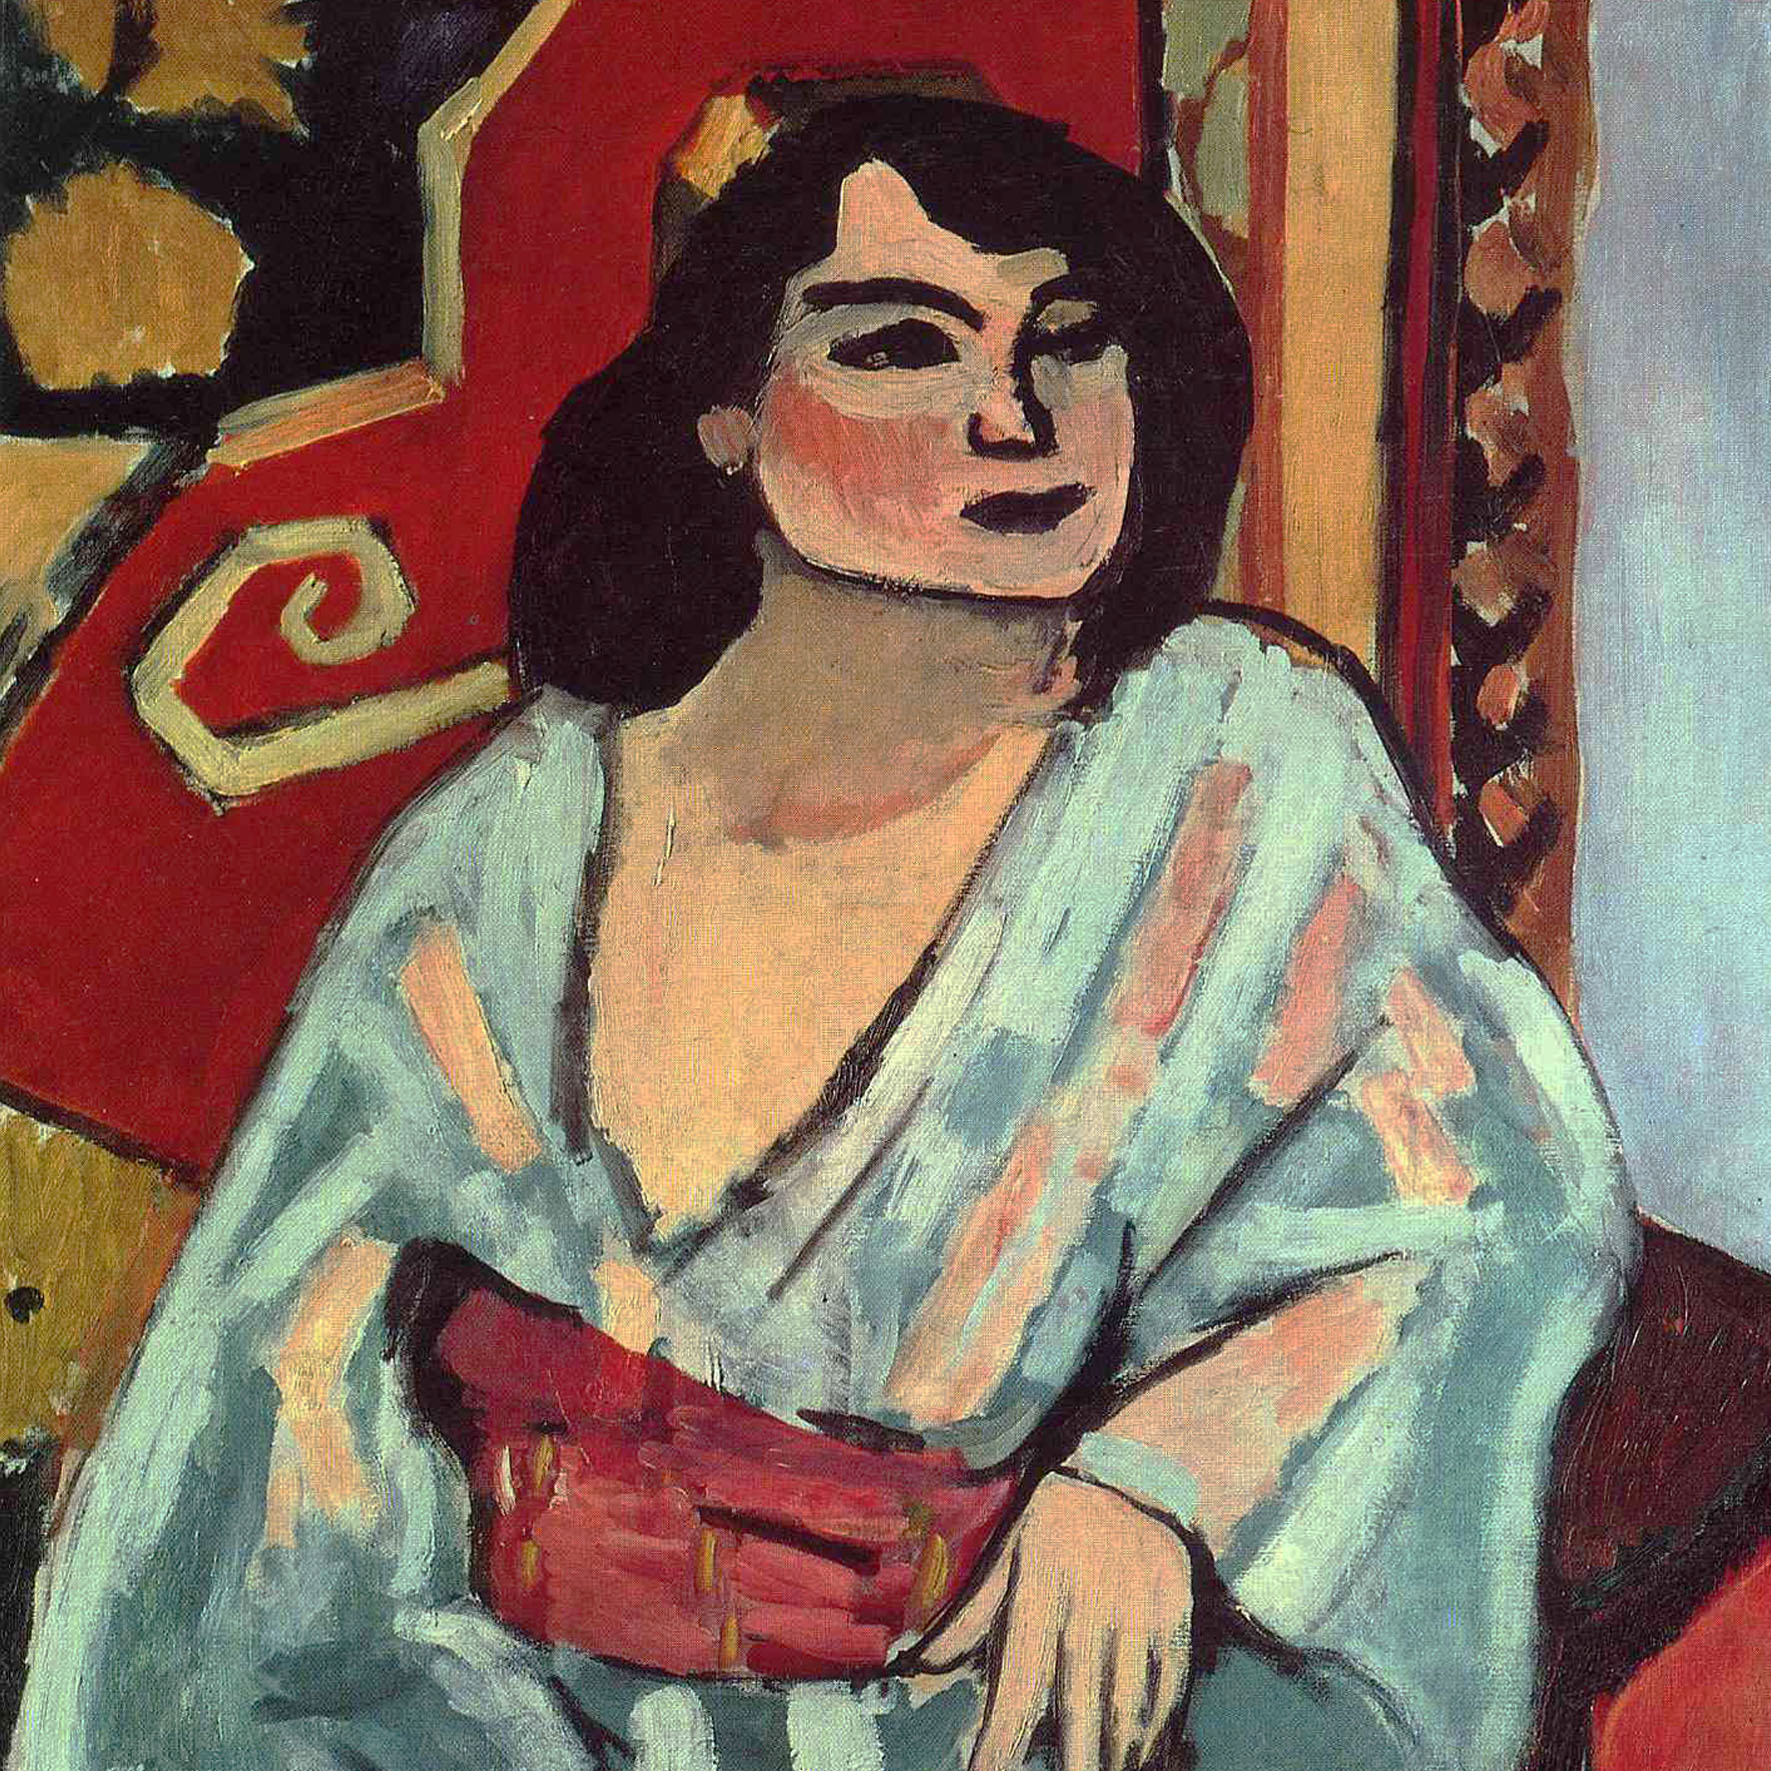 Matisse and his time